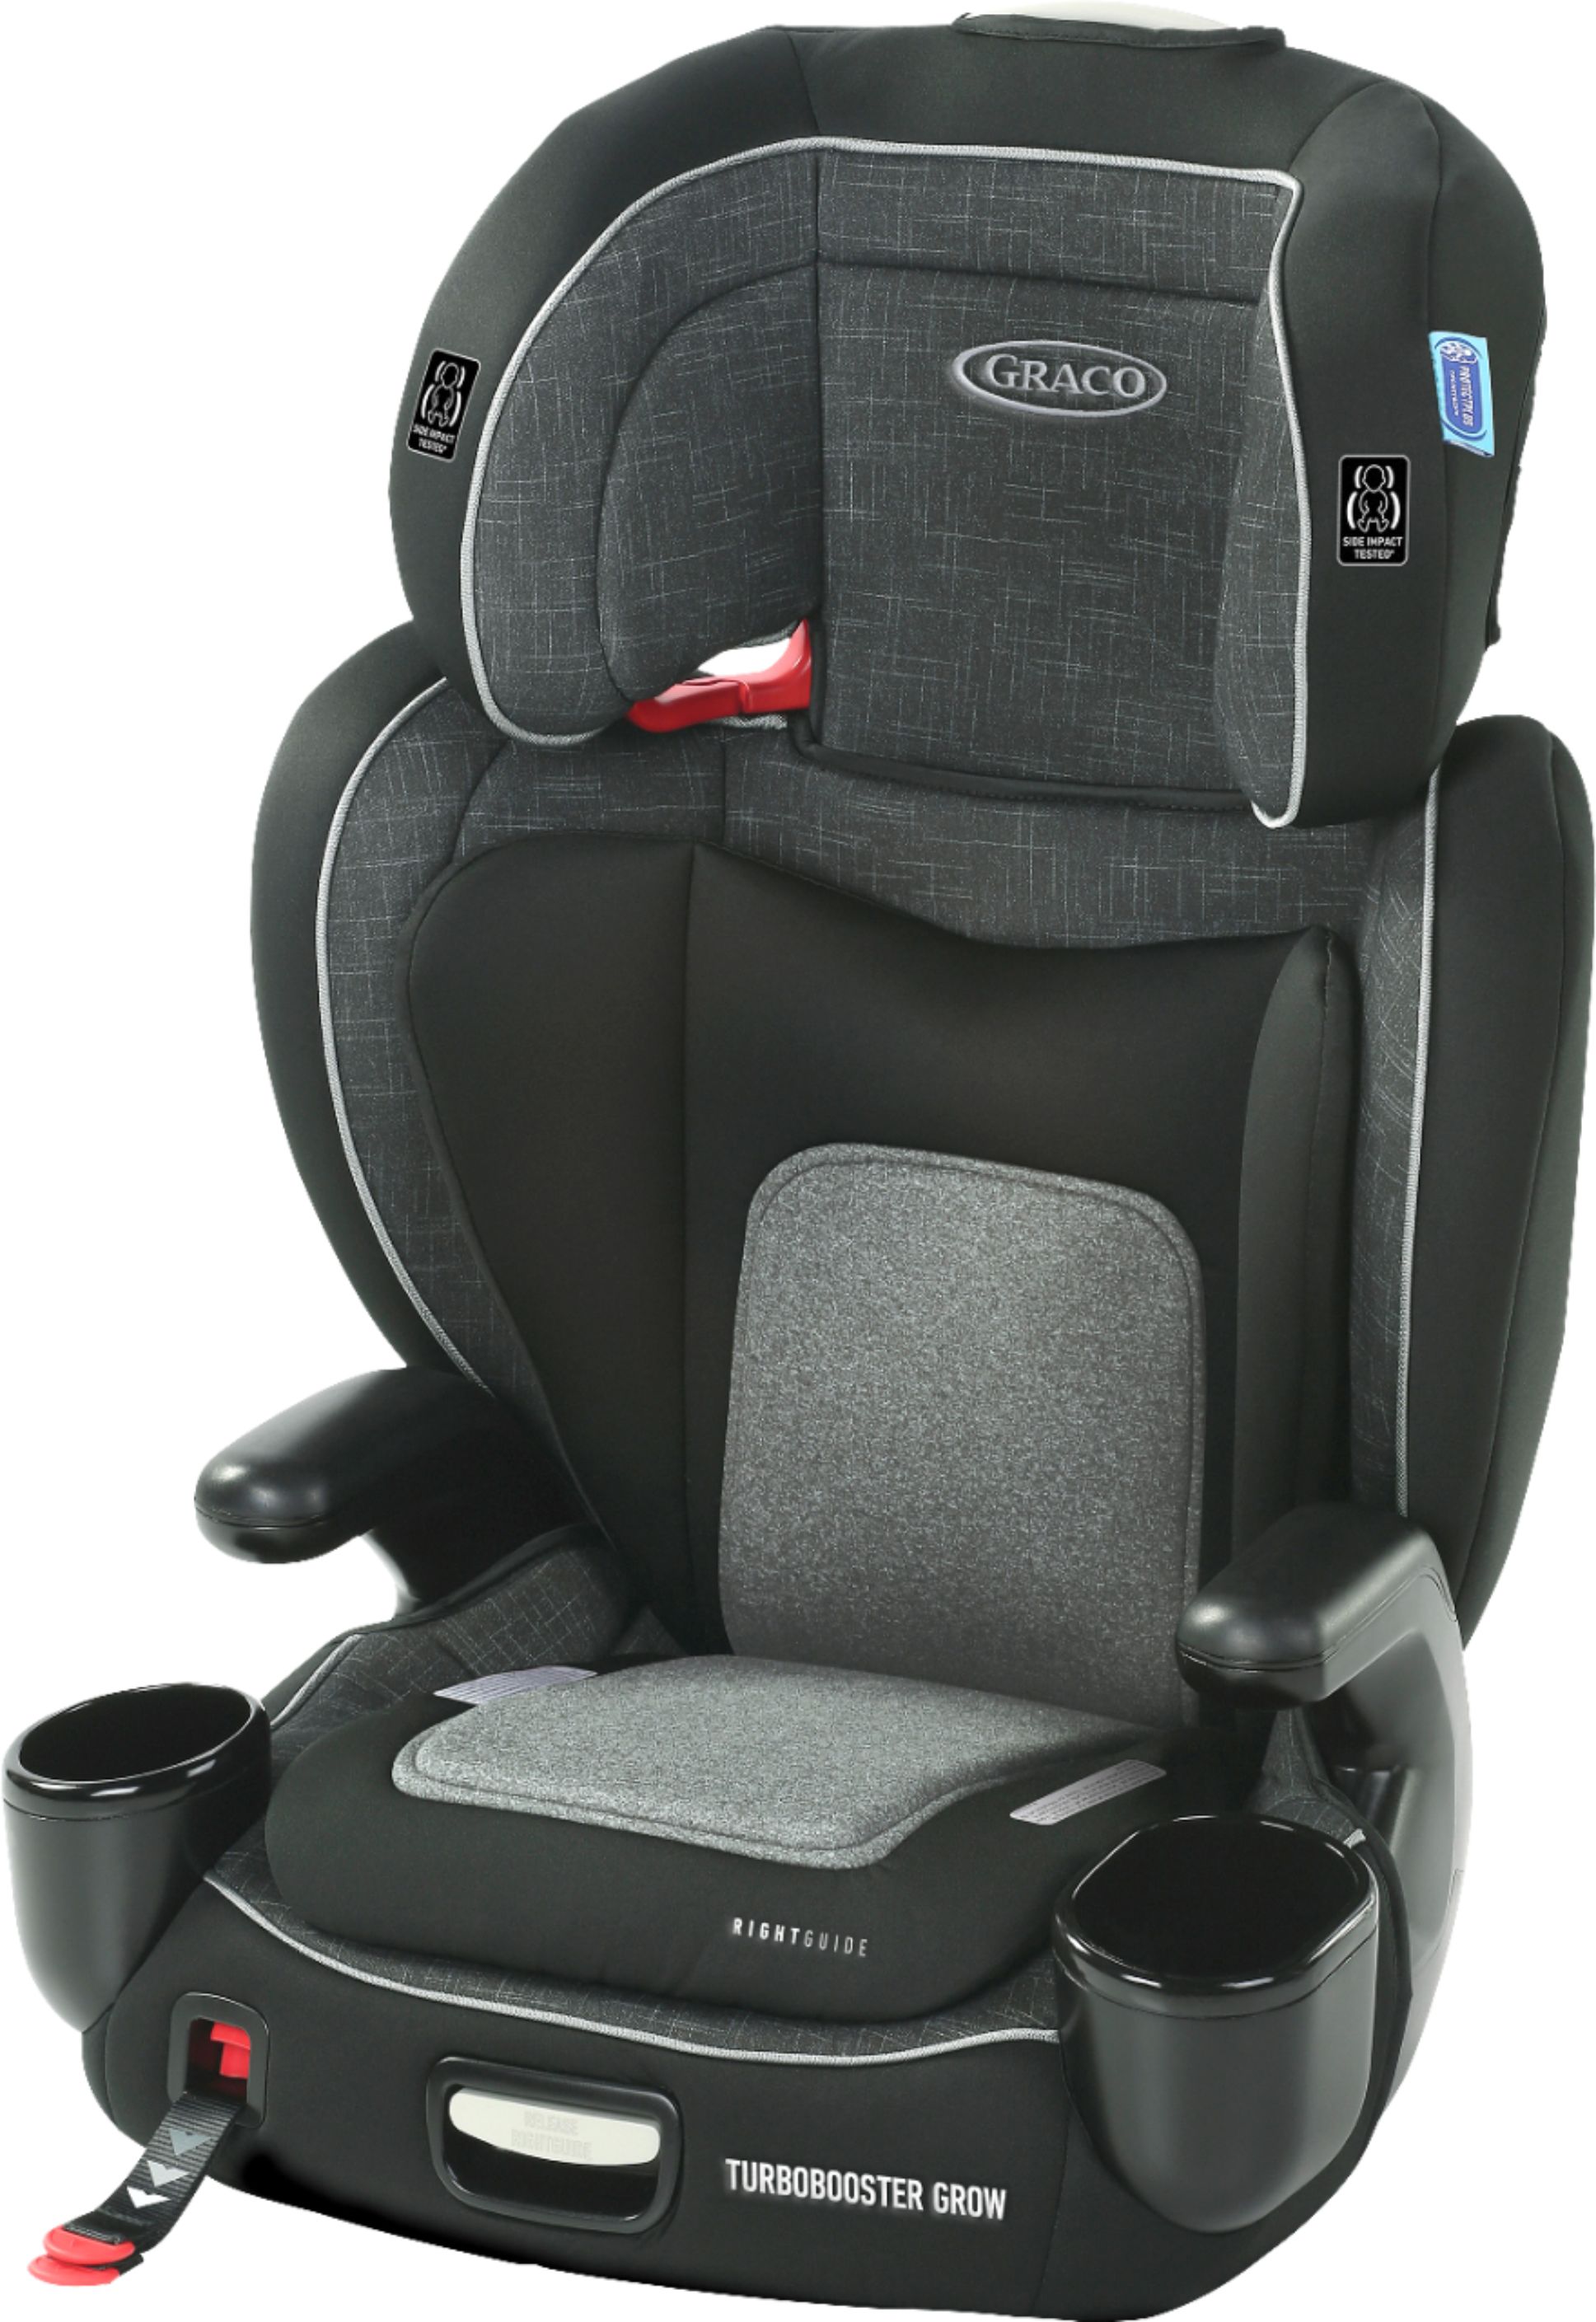 Angle View: Graco - TurboBooster Grow Highback Booster with RightGuide Seat Belt Trainer - West Point